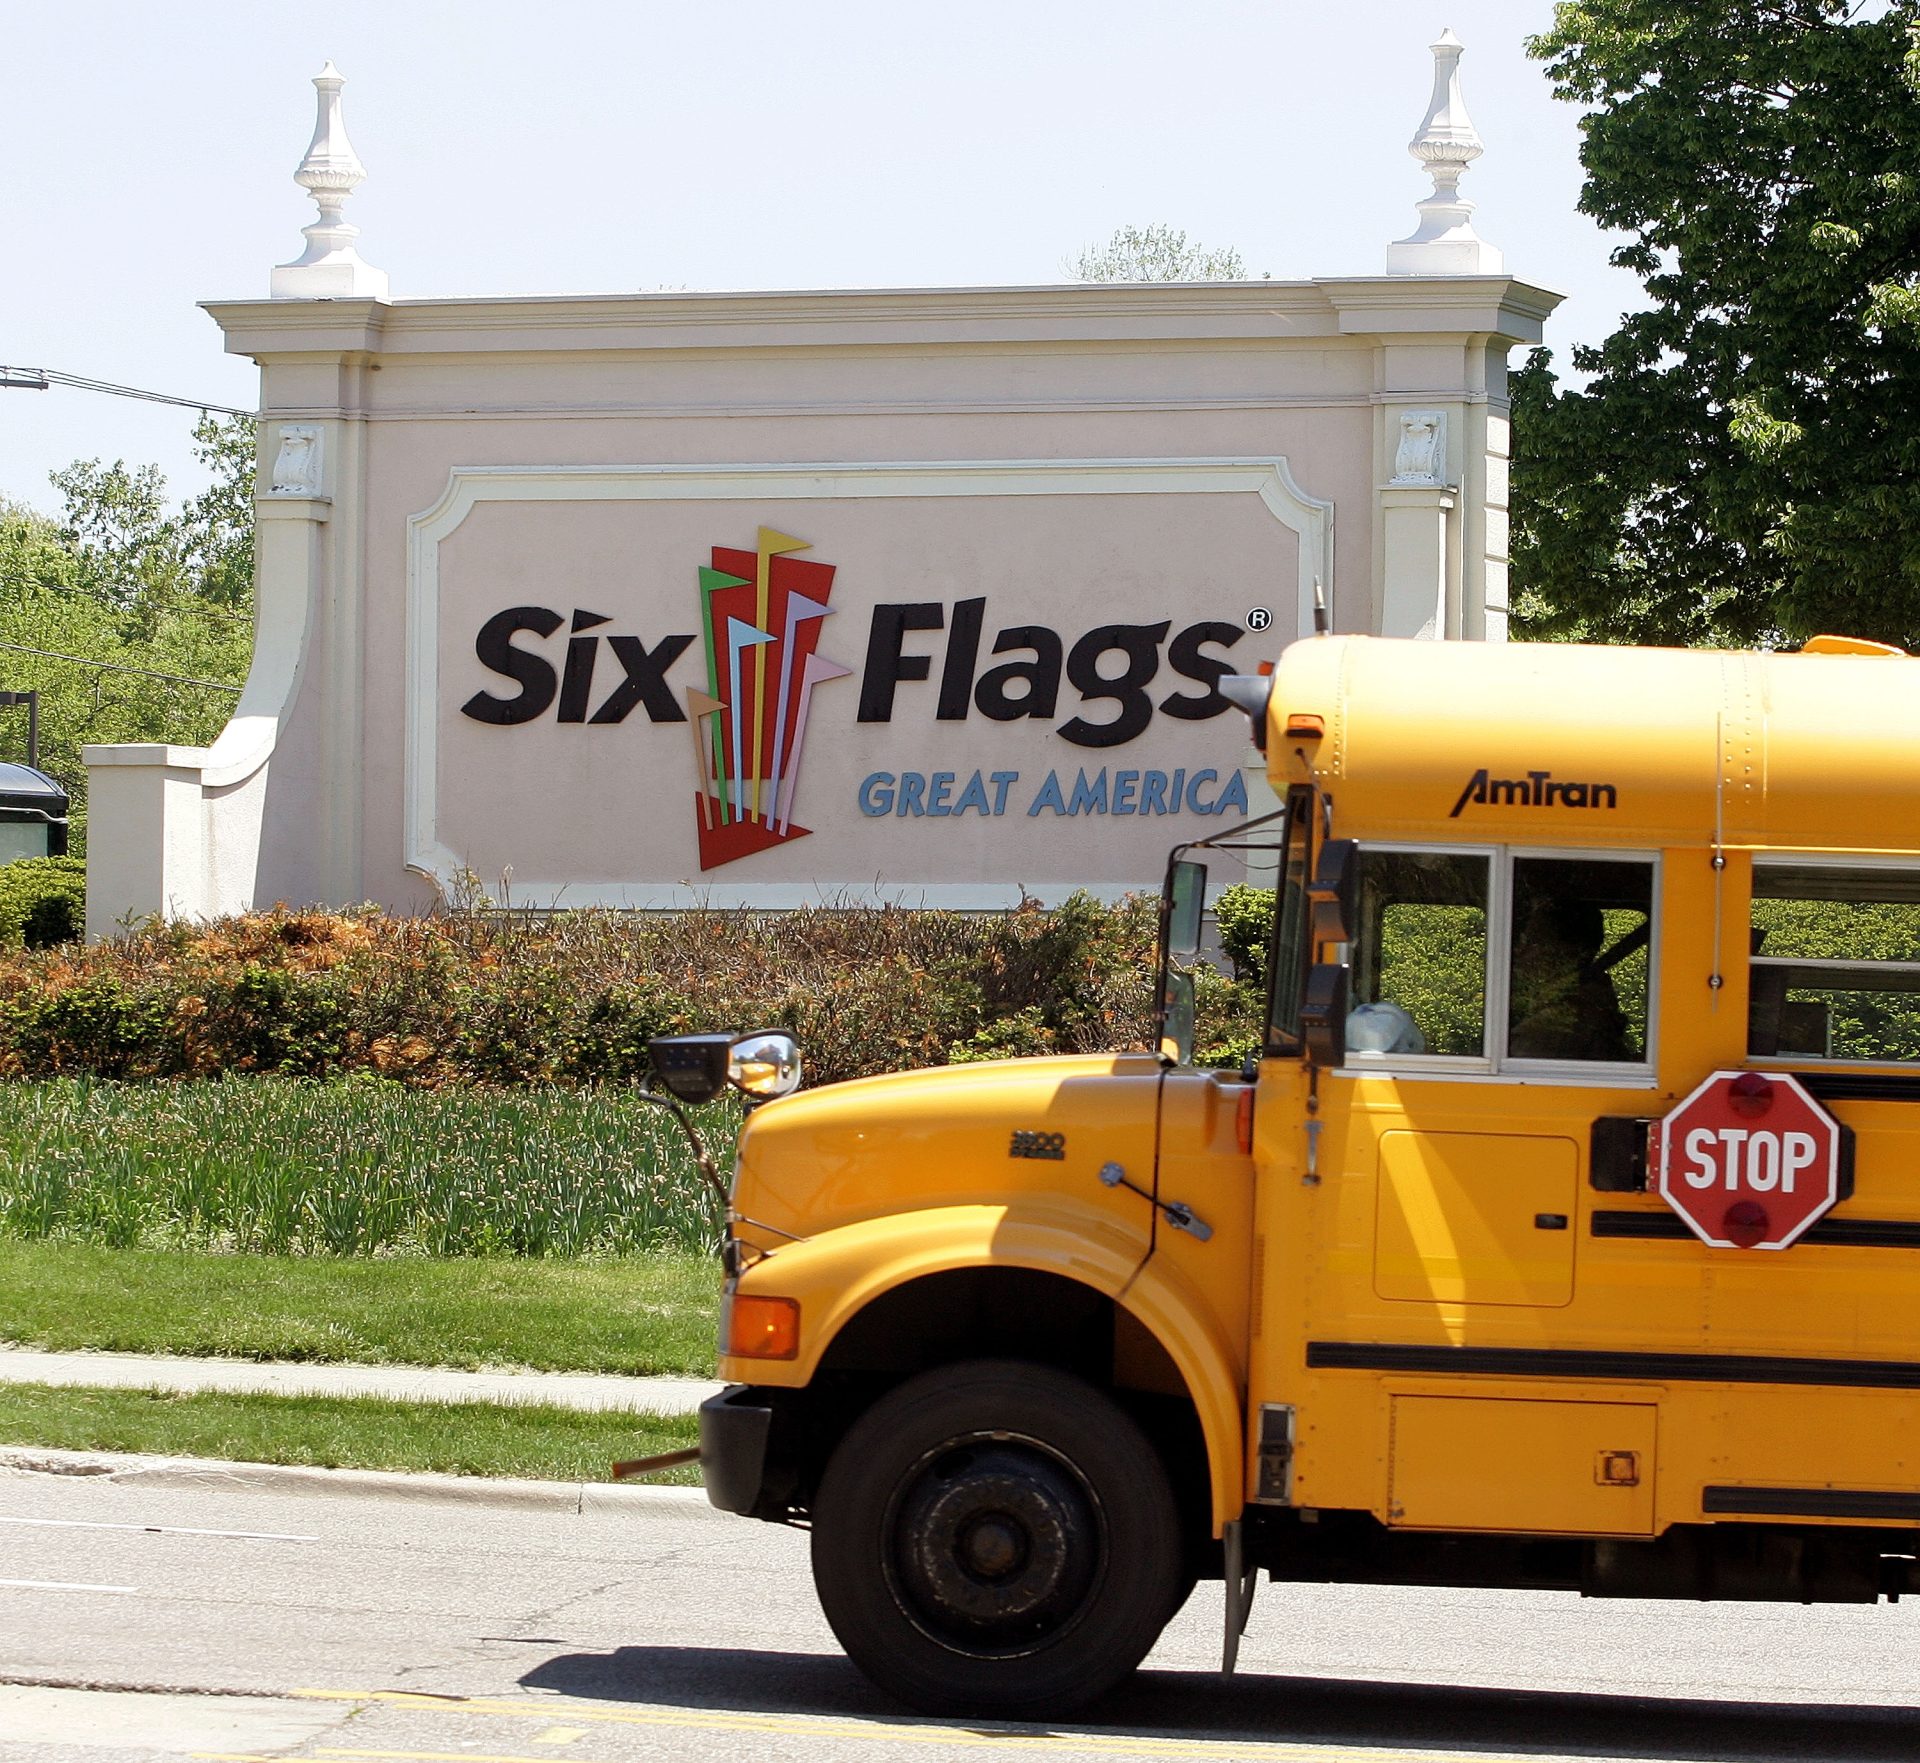 Three People Shot And Injured At Six Flags Great America In Illinois